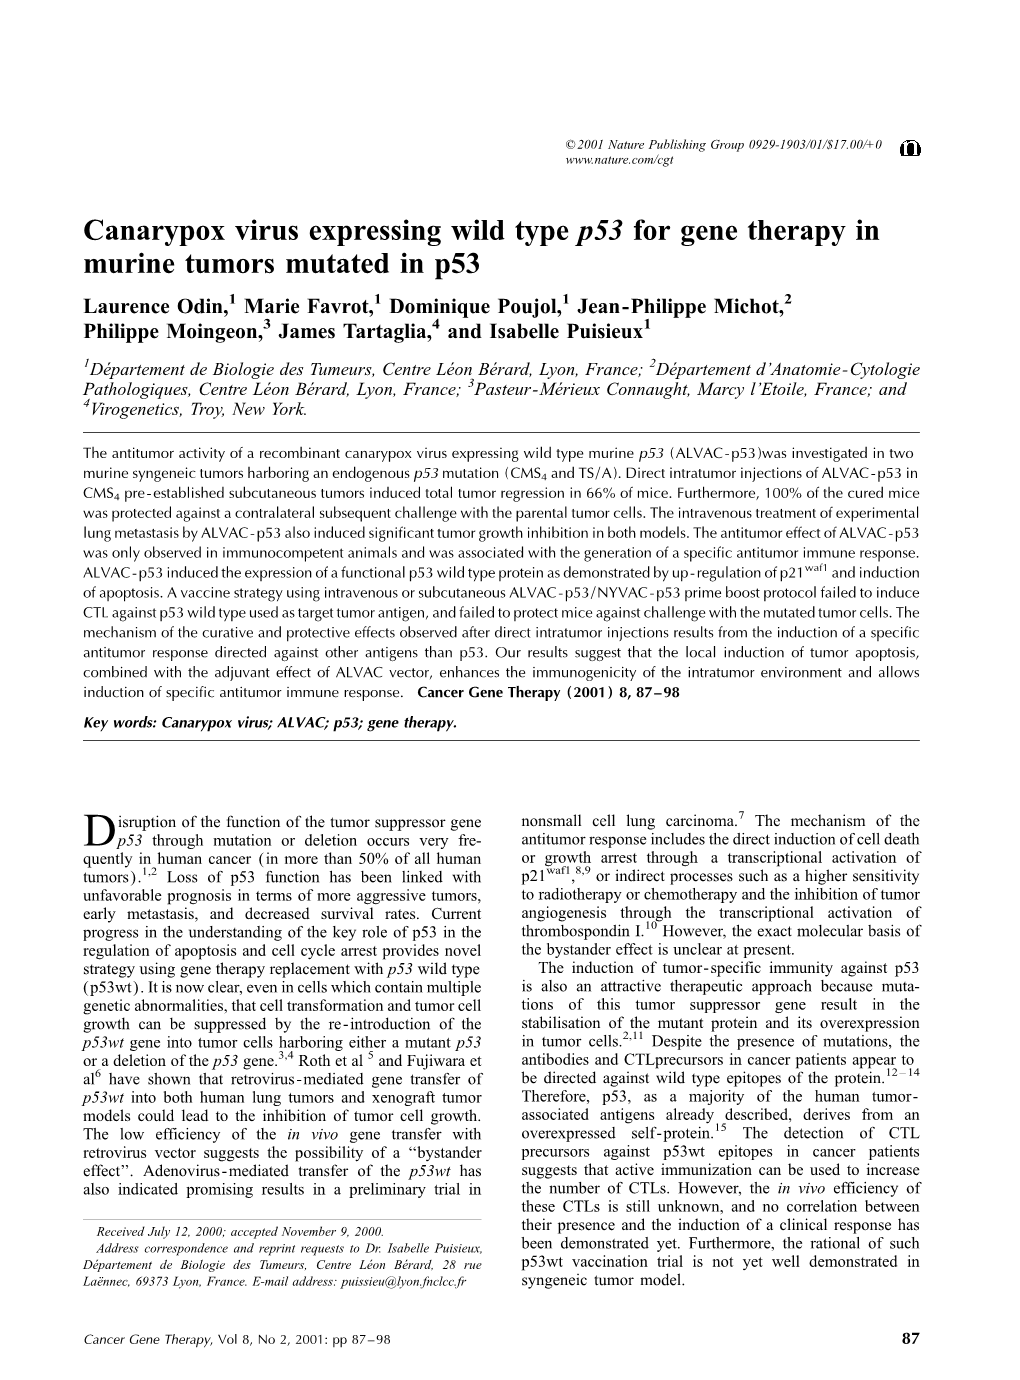 Canarypox Virus Expressing Wild Type P53 for Gene Therapy in Murine